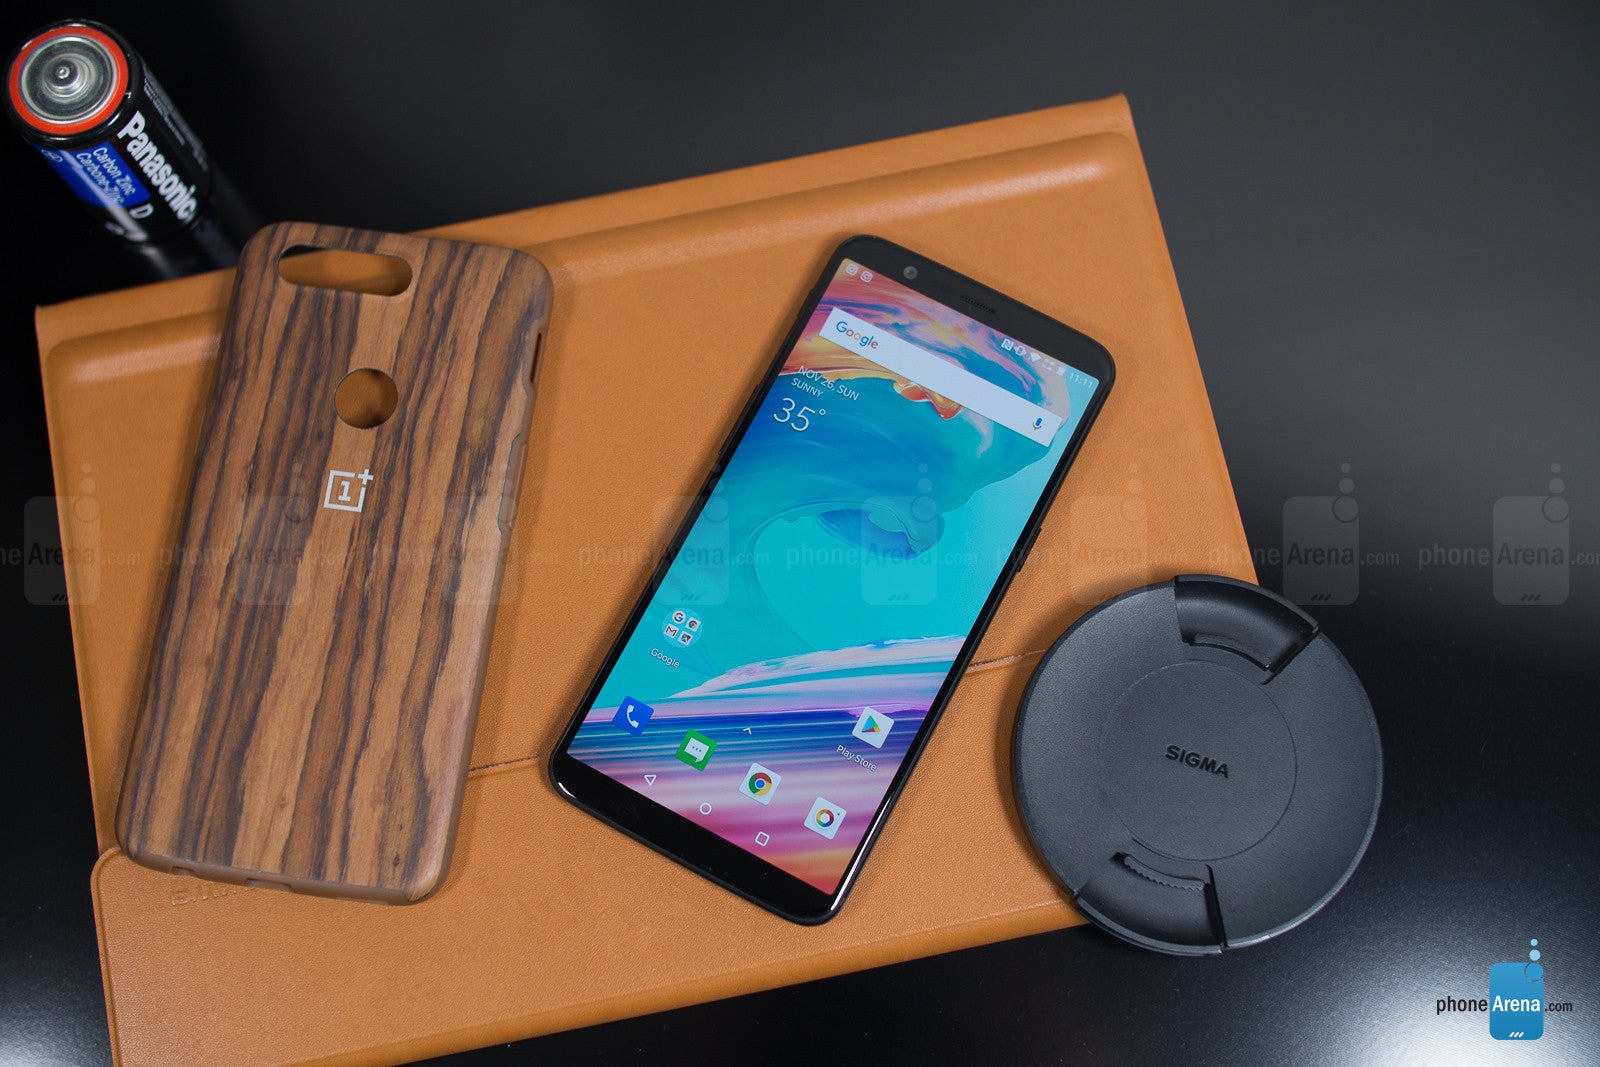 Update: OnePlus disables credit card payments on its website in wake of reported security breach